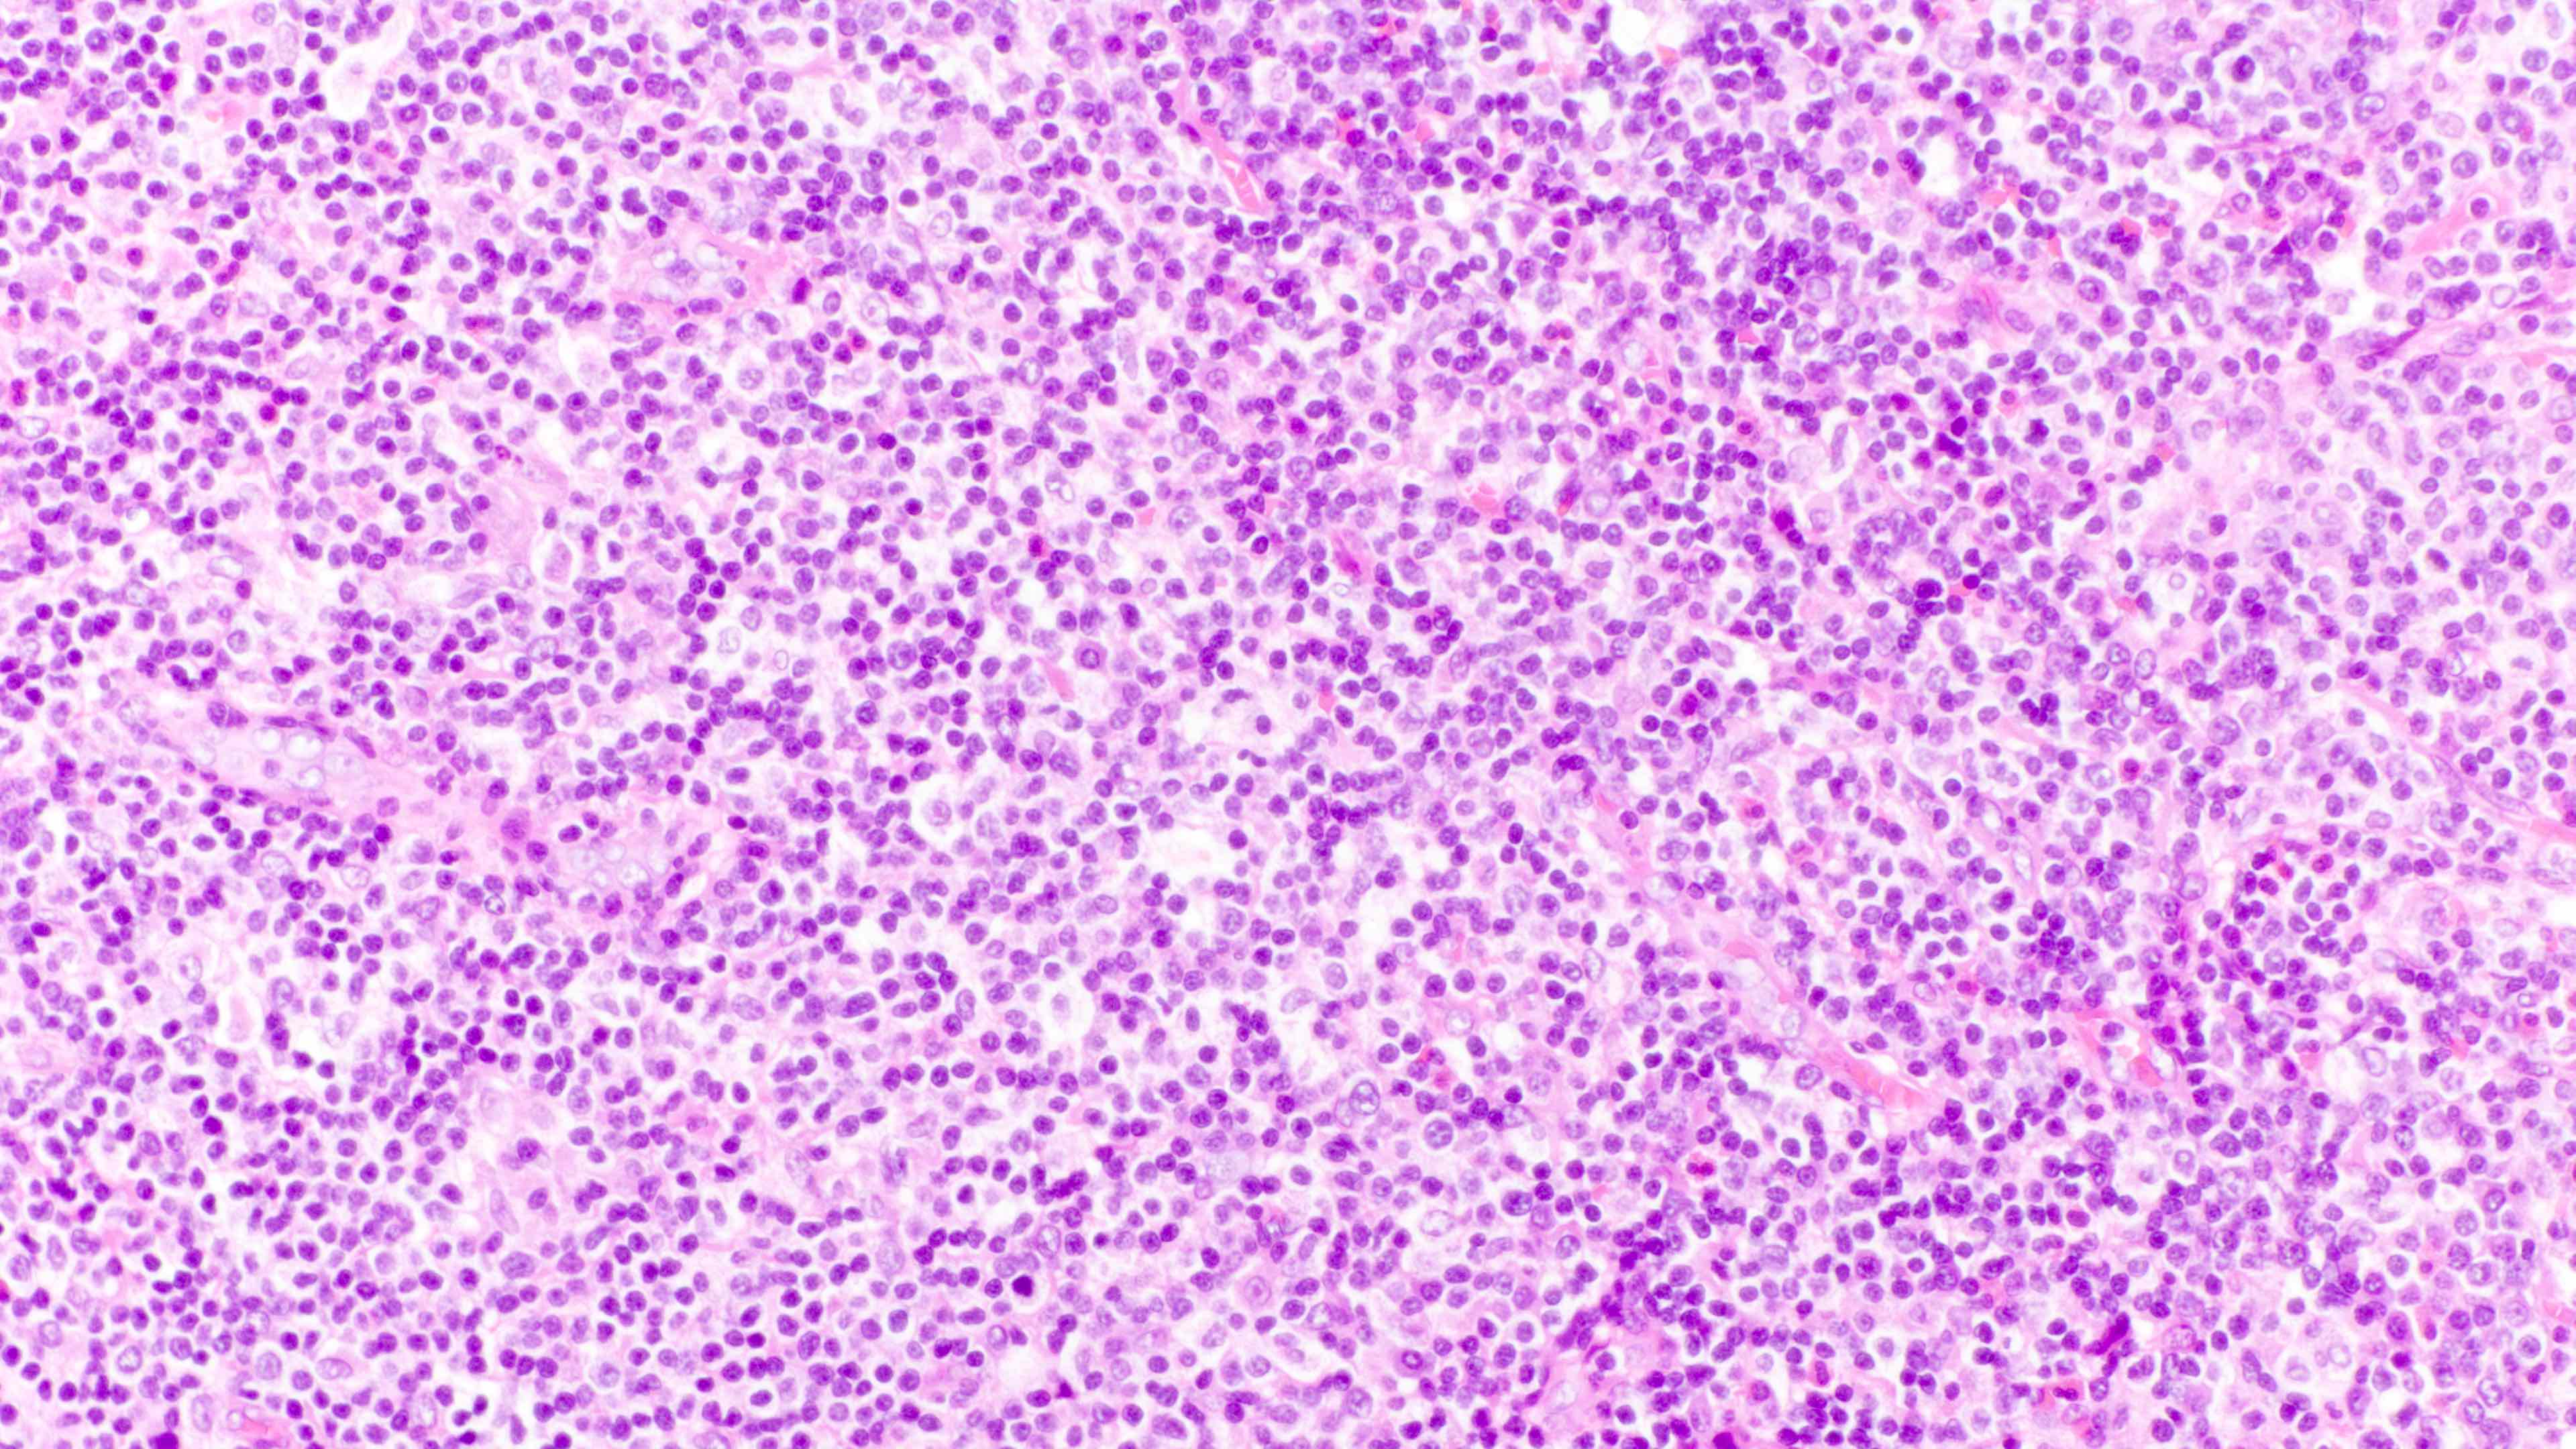 Polymorphic lymphoid infiltrate